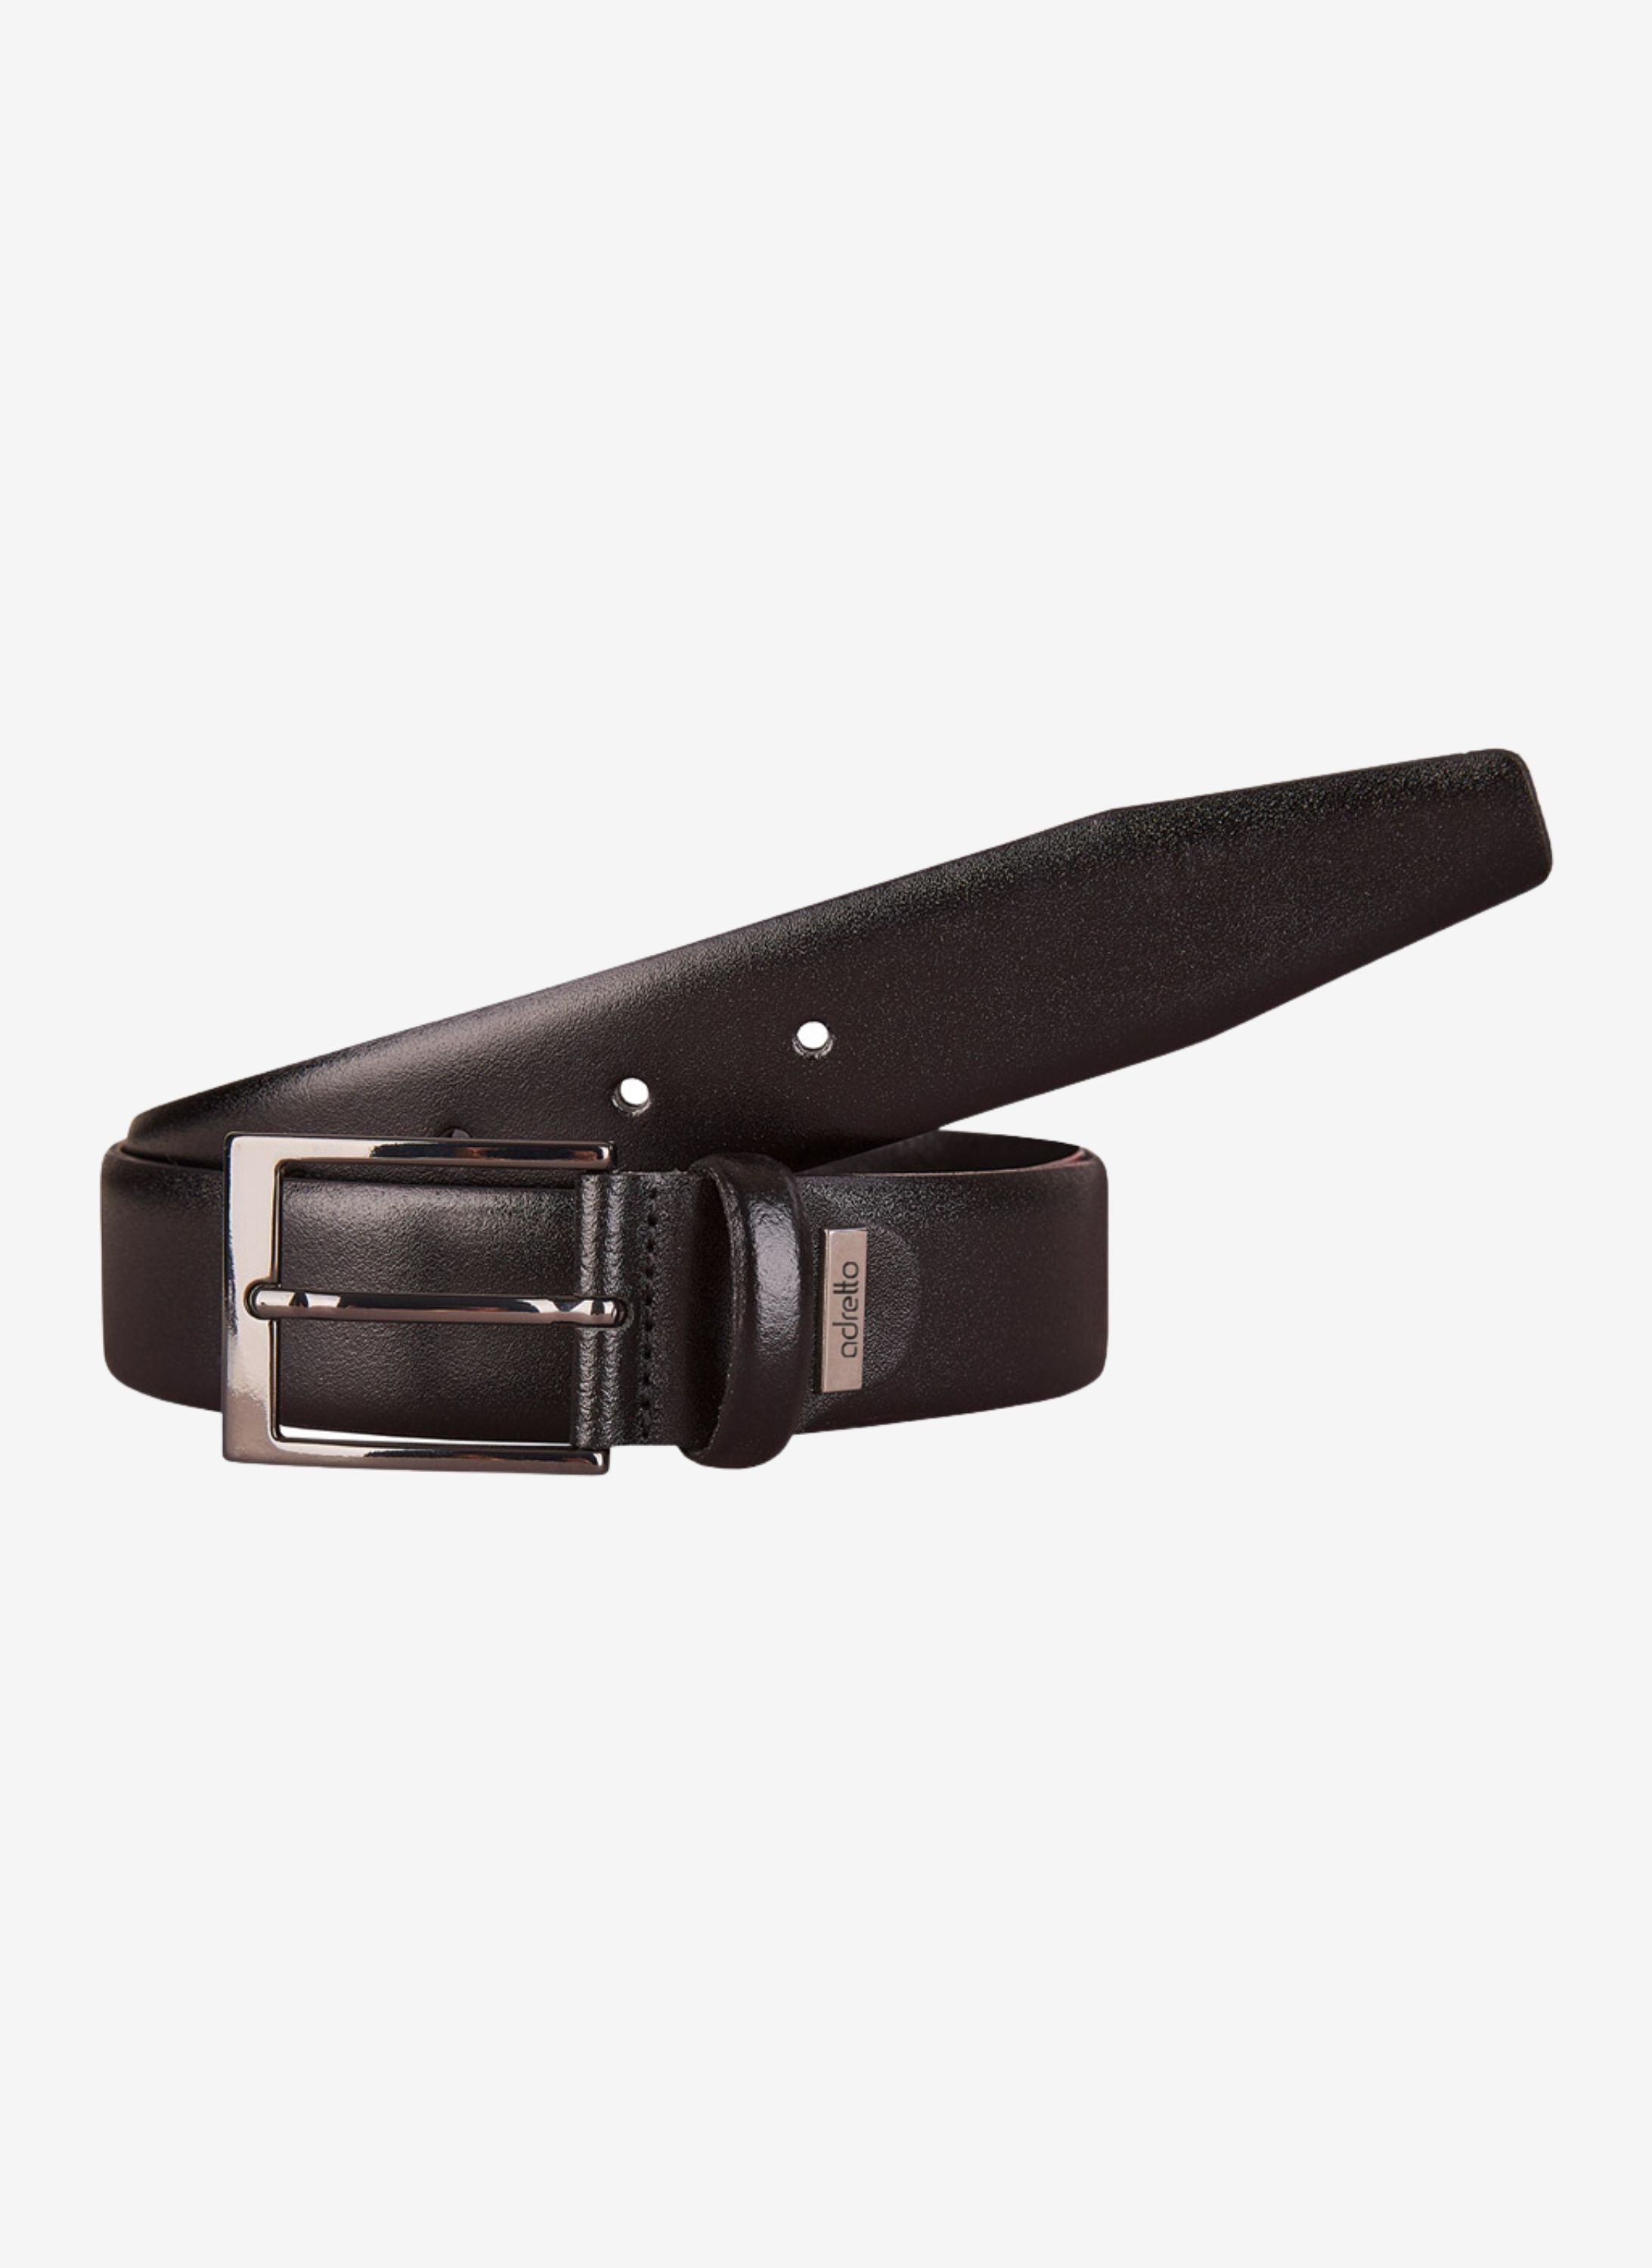 Leather belt brown in | your men - suit timeless for for stylish 